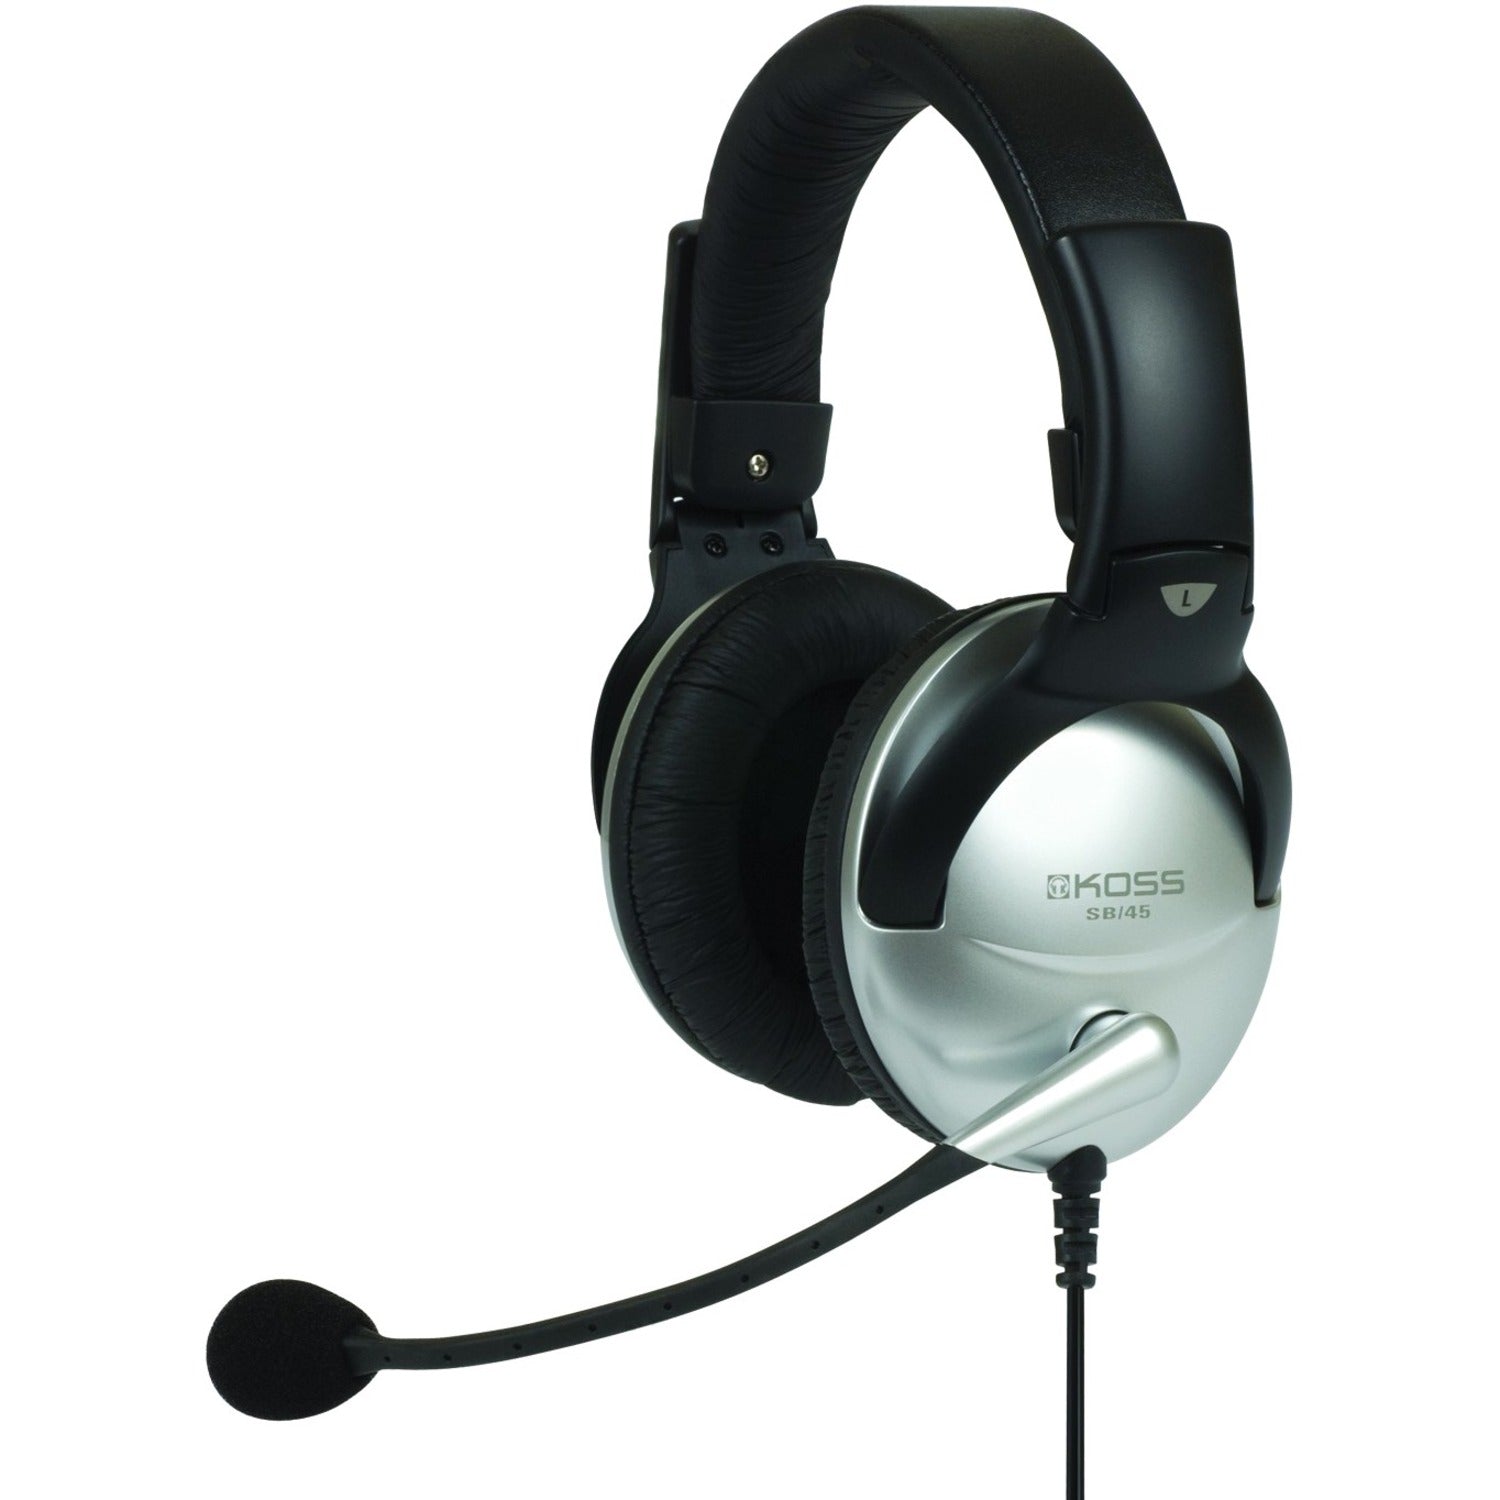 Koss 195679 SB45 Headsets & Gaming, Over-the-head Binaural Stereo Gaming Headset with Noise Reduction Microphone